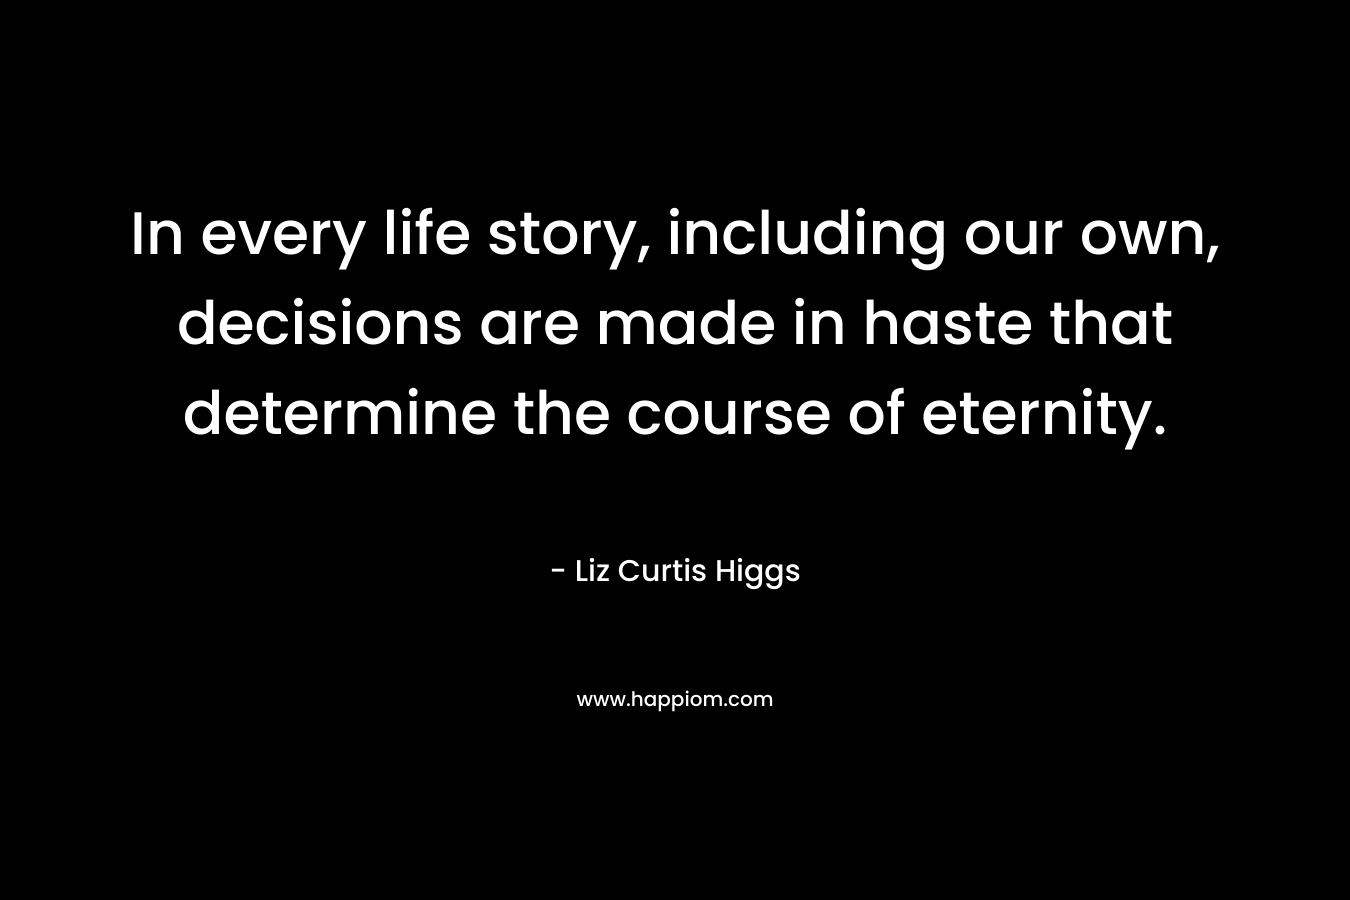 In every life story, including our own, decisions are made in haste that determine the course of eternity.